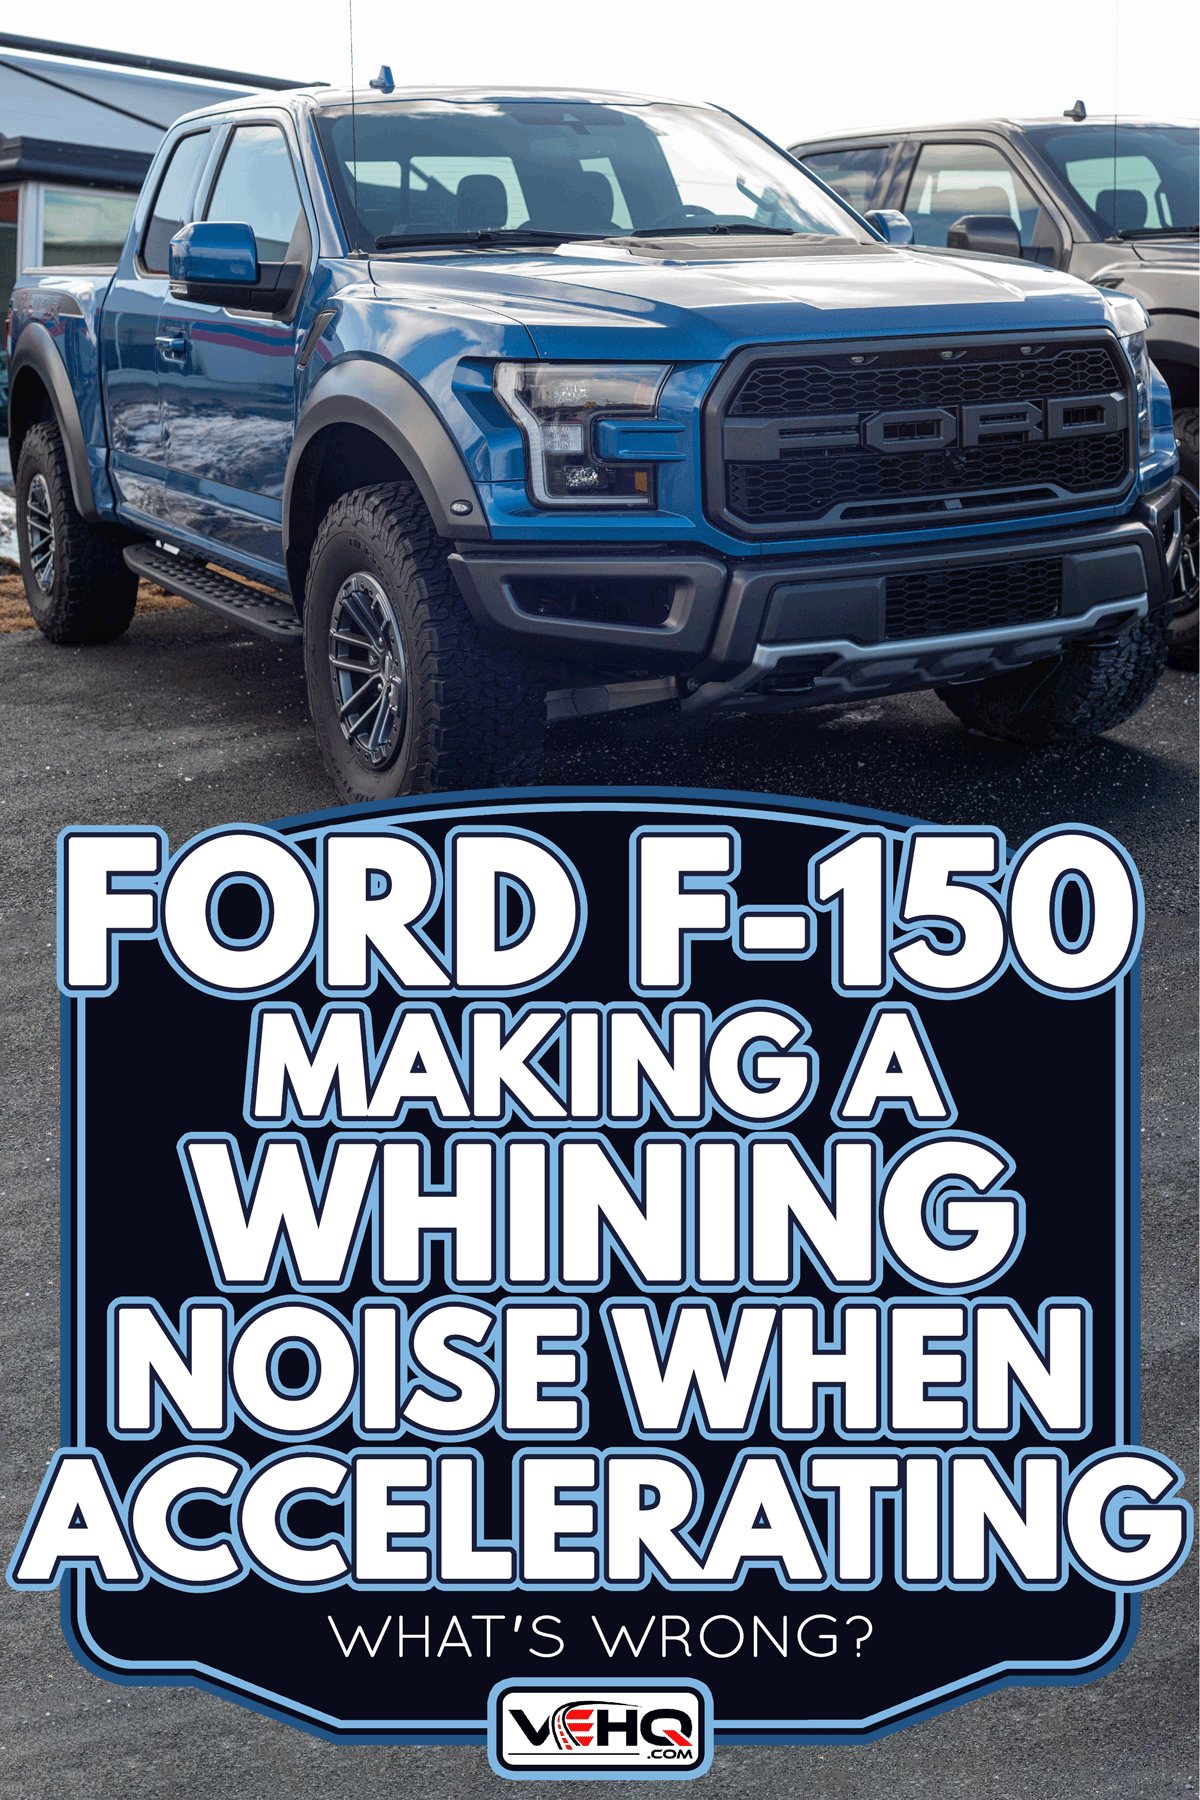 Ford F-150 Raptor pickup truck at a Ford dealership, Ford F-150 Making A Whining Noise When Accelerating - What's Wrong?